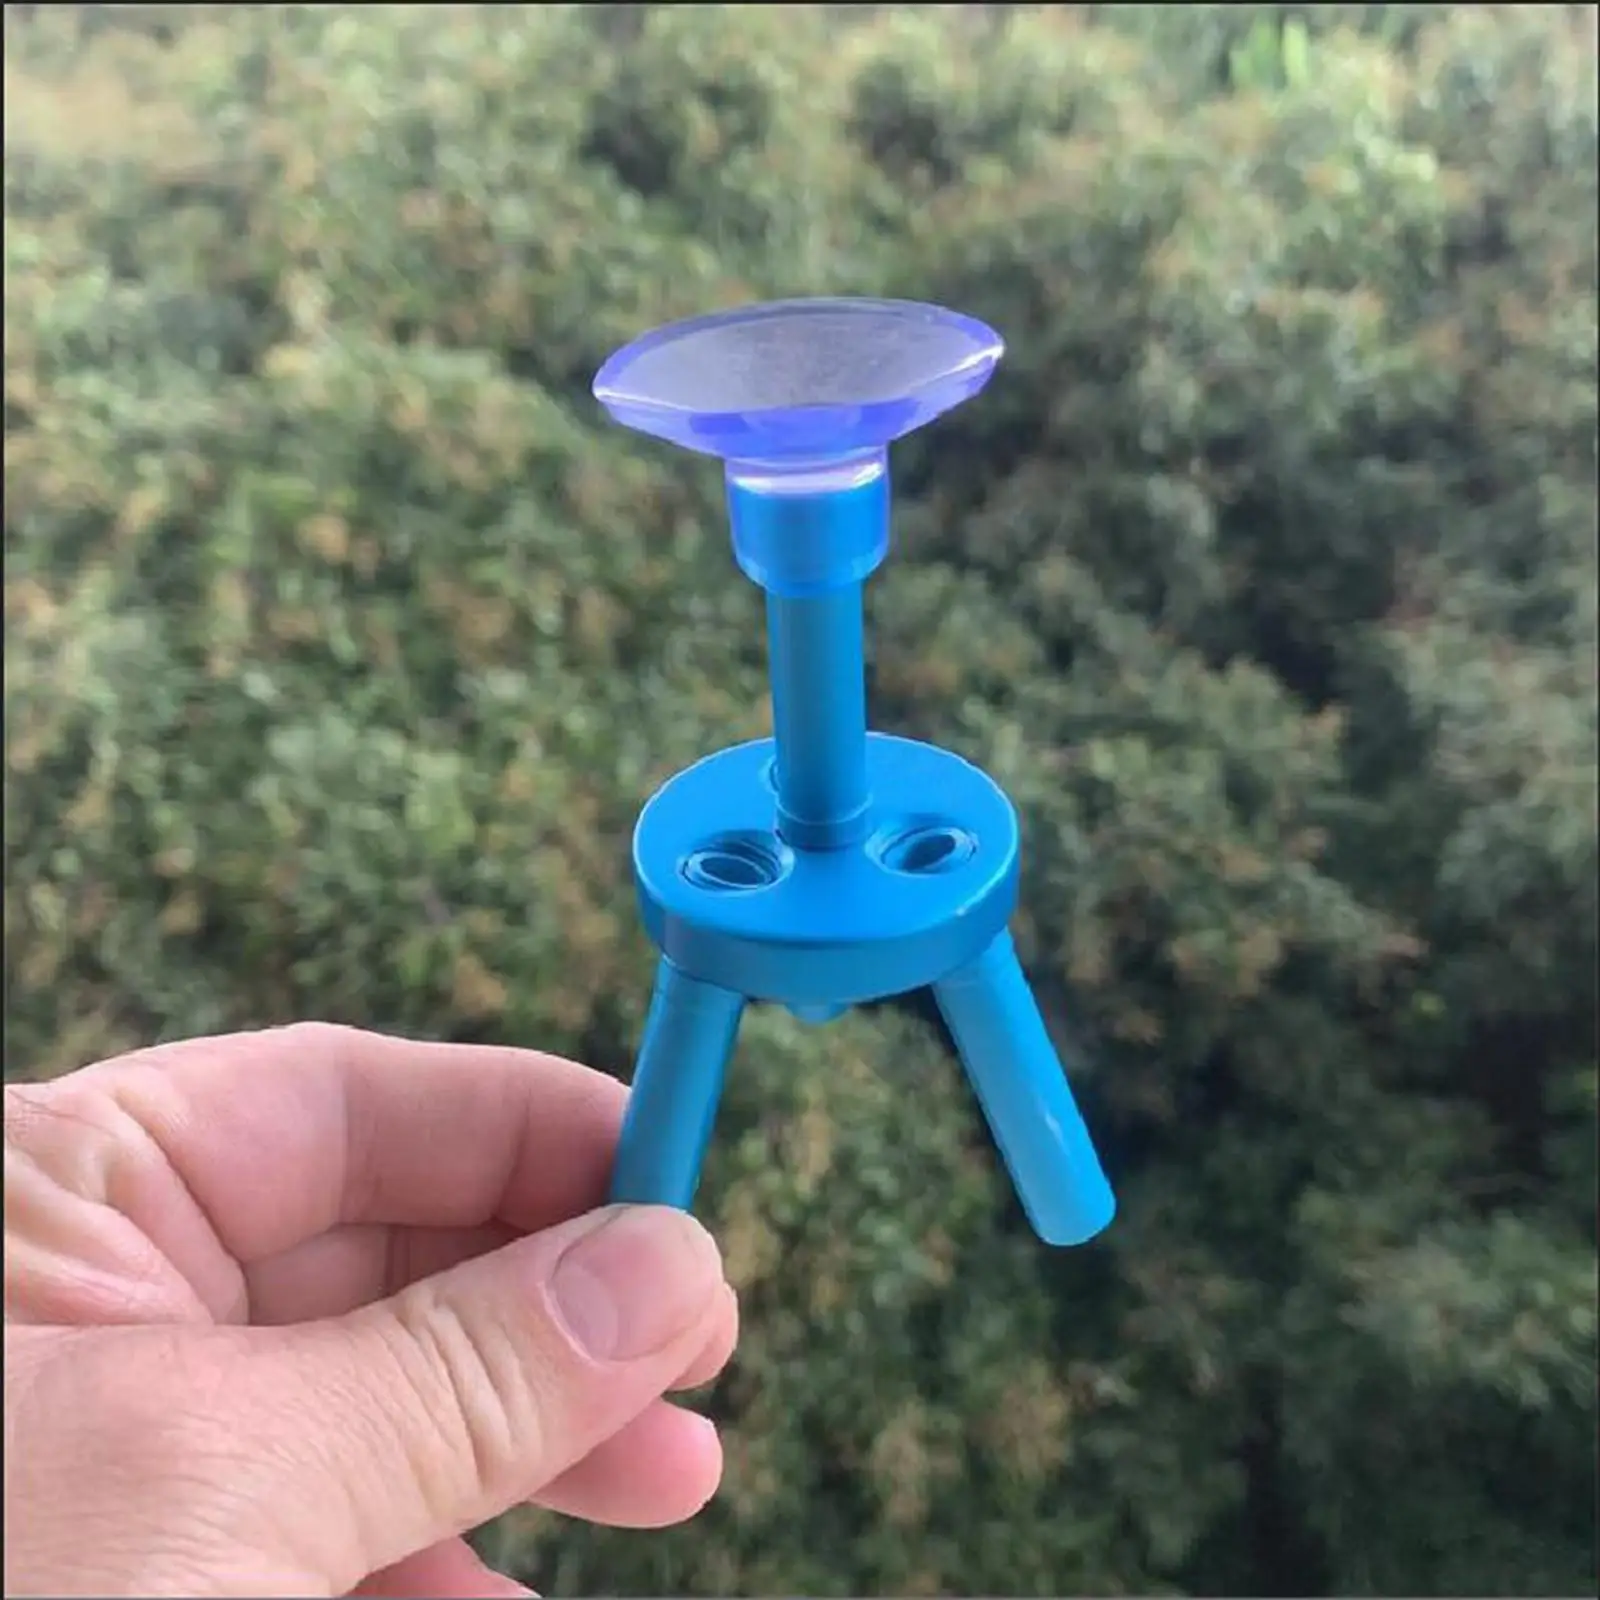 4 Way Tent Connections Framewor Anti Puncture Build Heavy Duty Greenhouse Frame Tent Poles Cap for Outdoor Awning Accessories